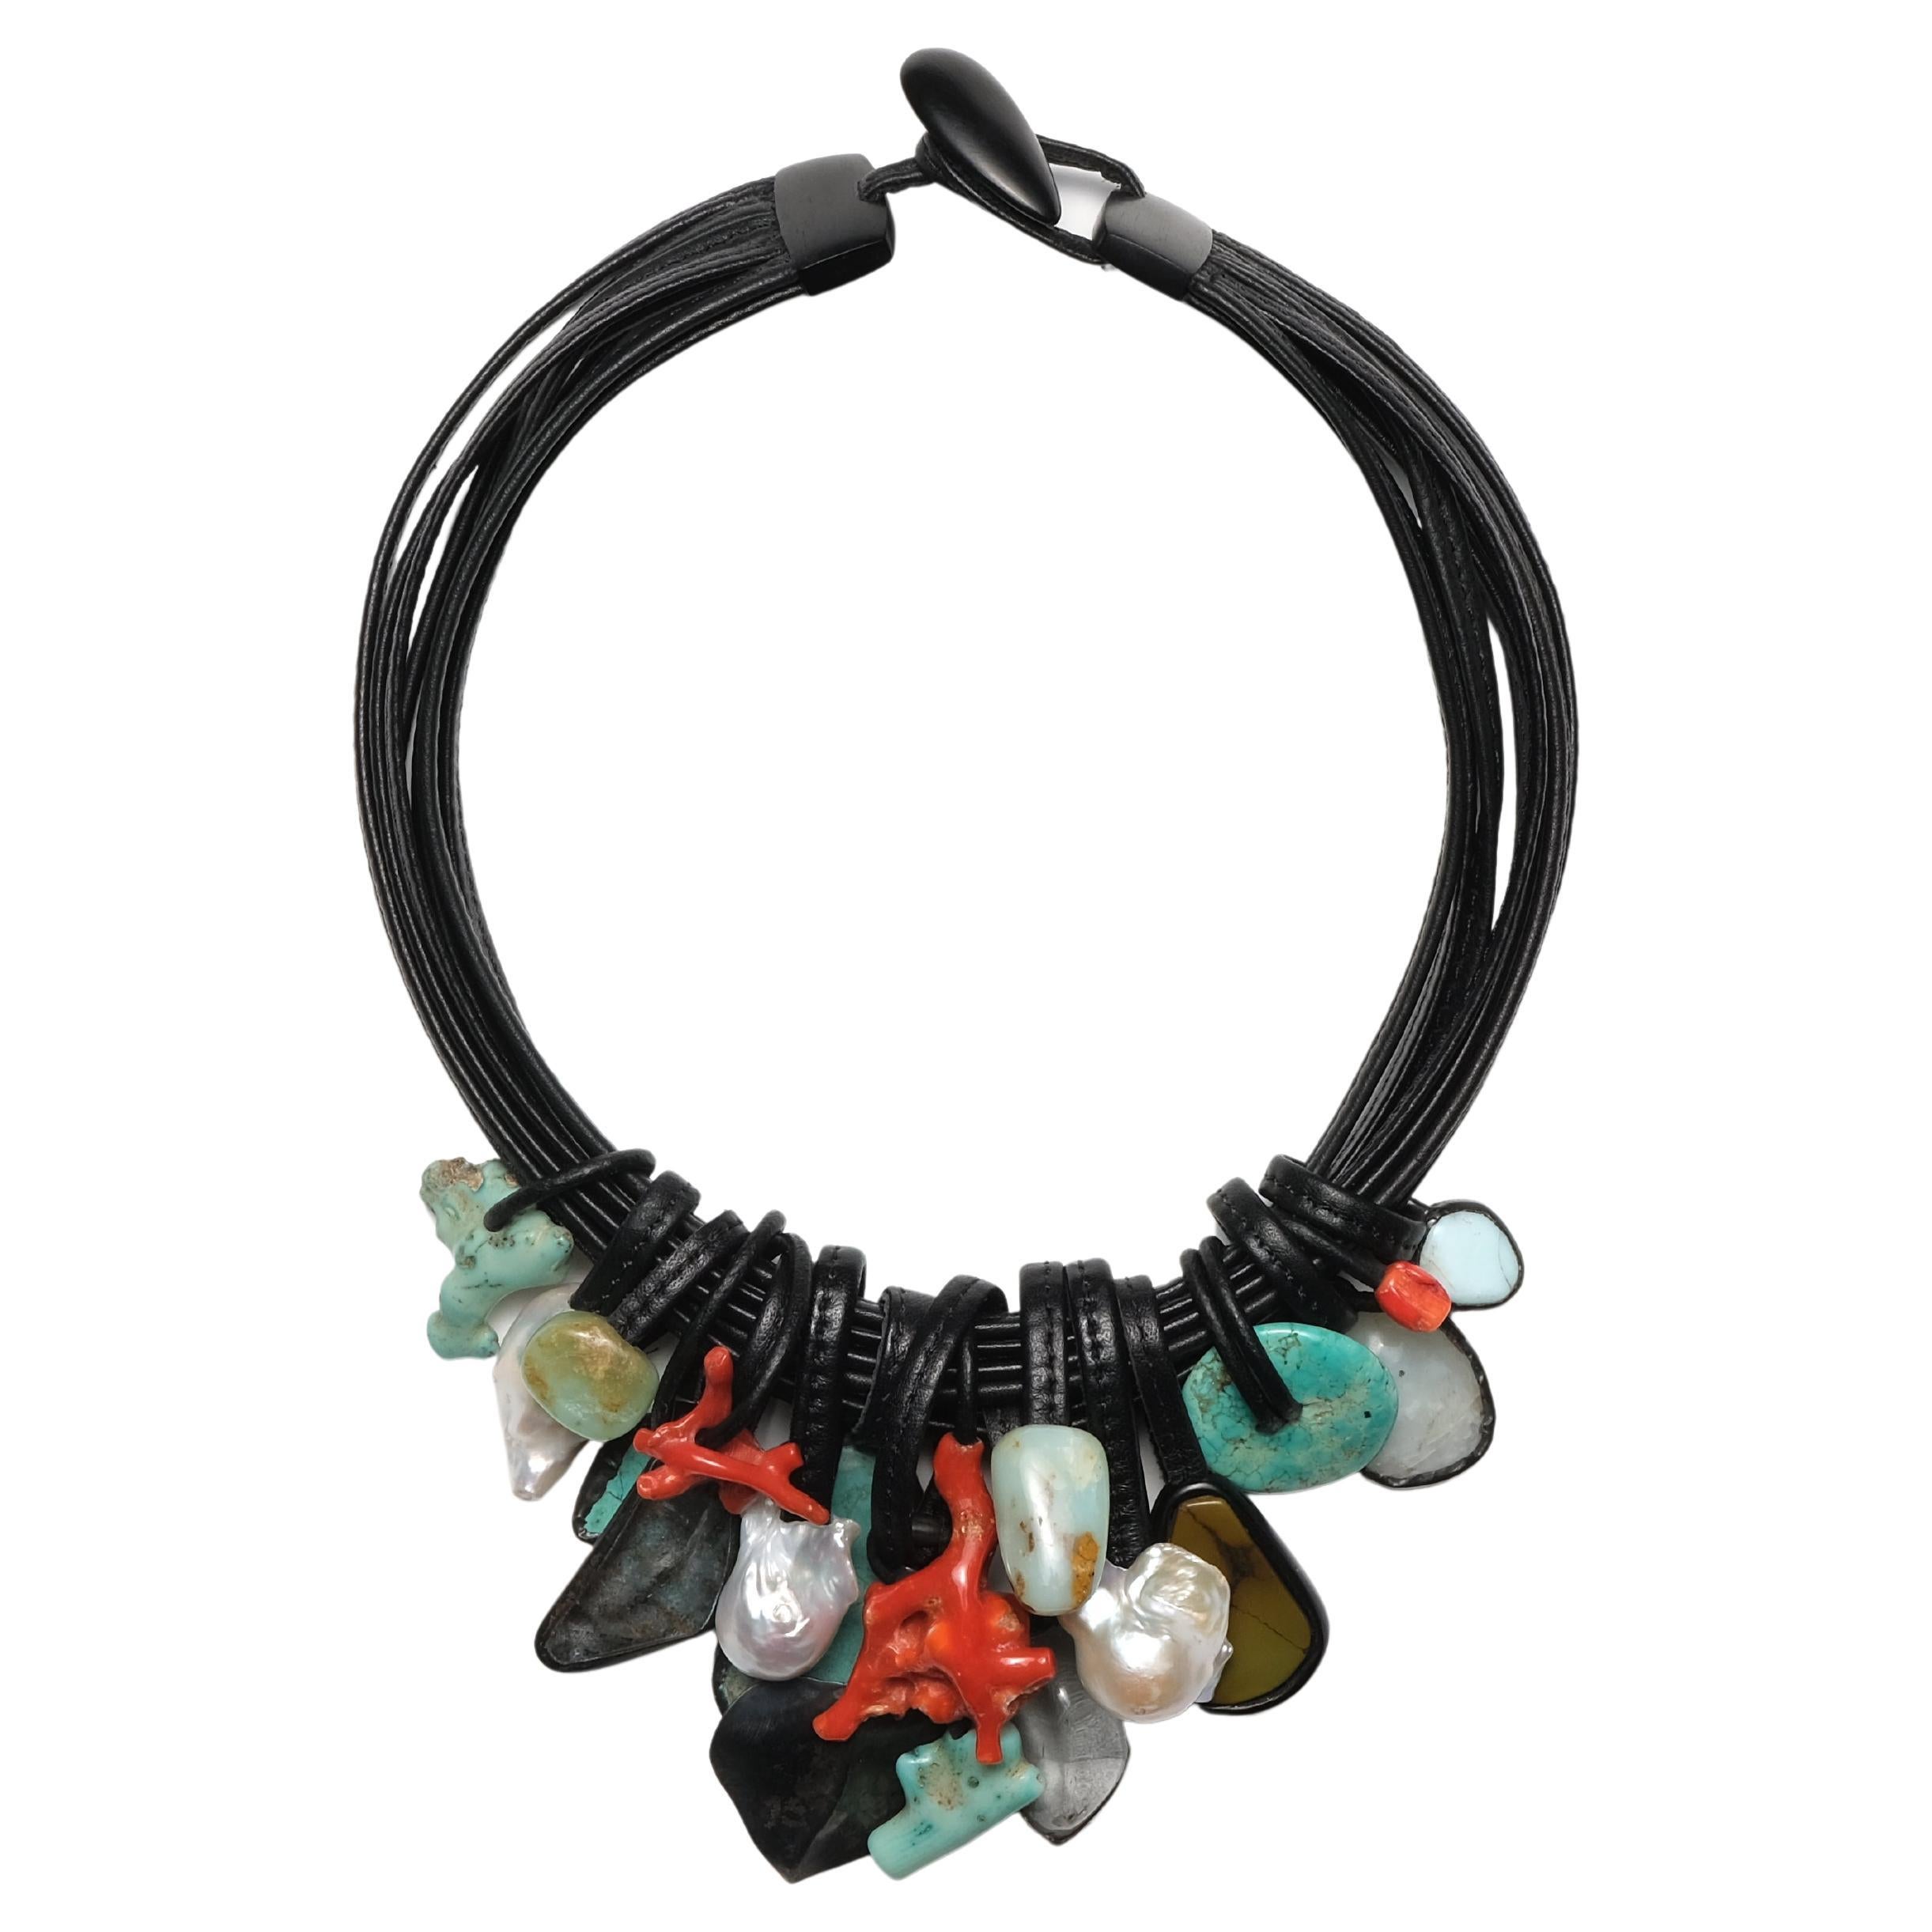 One-of-a-Kind Necklace in Mixed Materials from the Danish Brand Monies